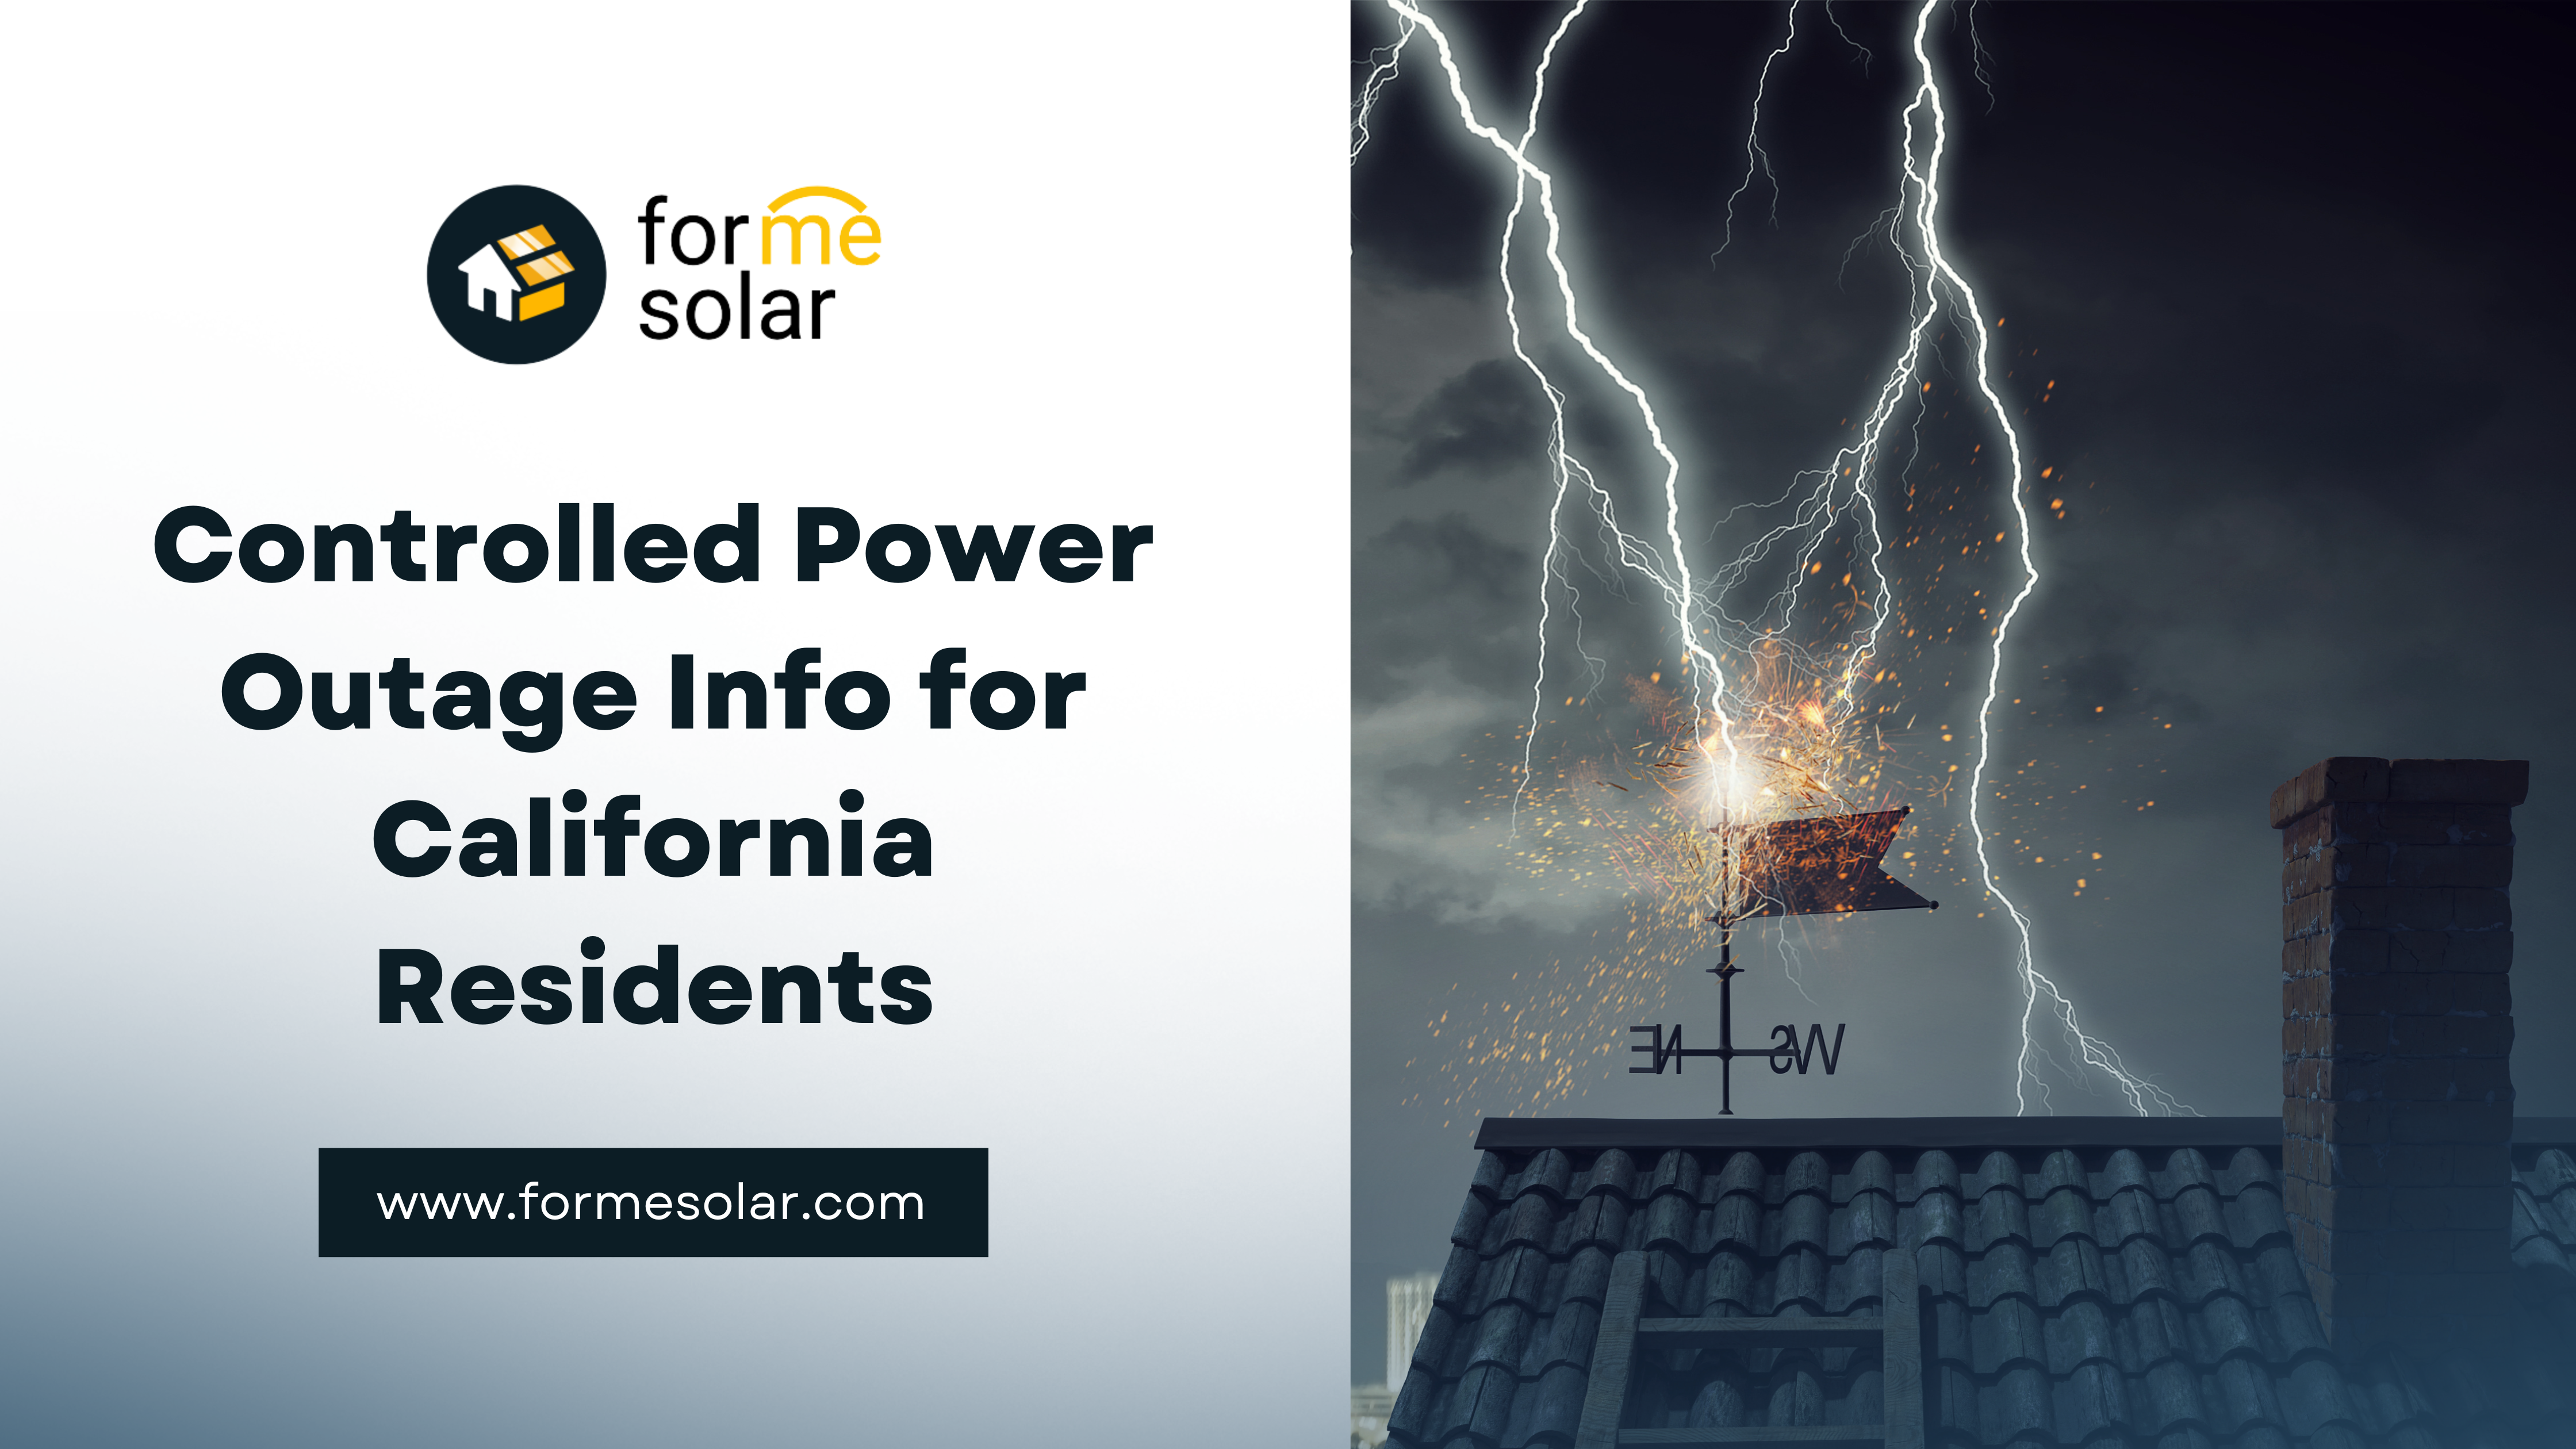 https://formesolar.com/wp-content/uploads/2023/02/Controlled-Power-Outage-Info-for-California-Residents.png